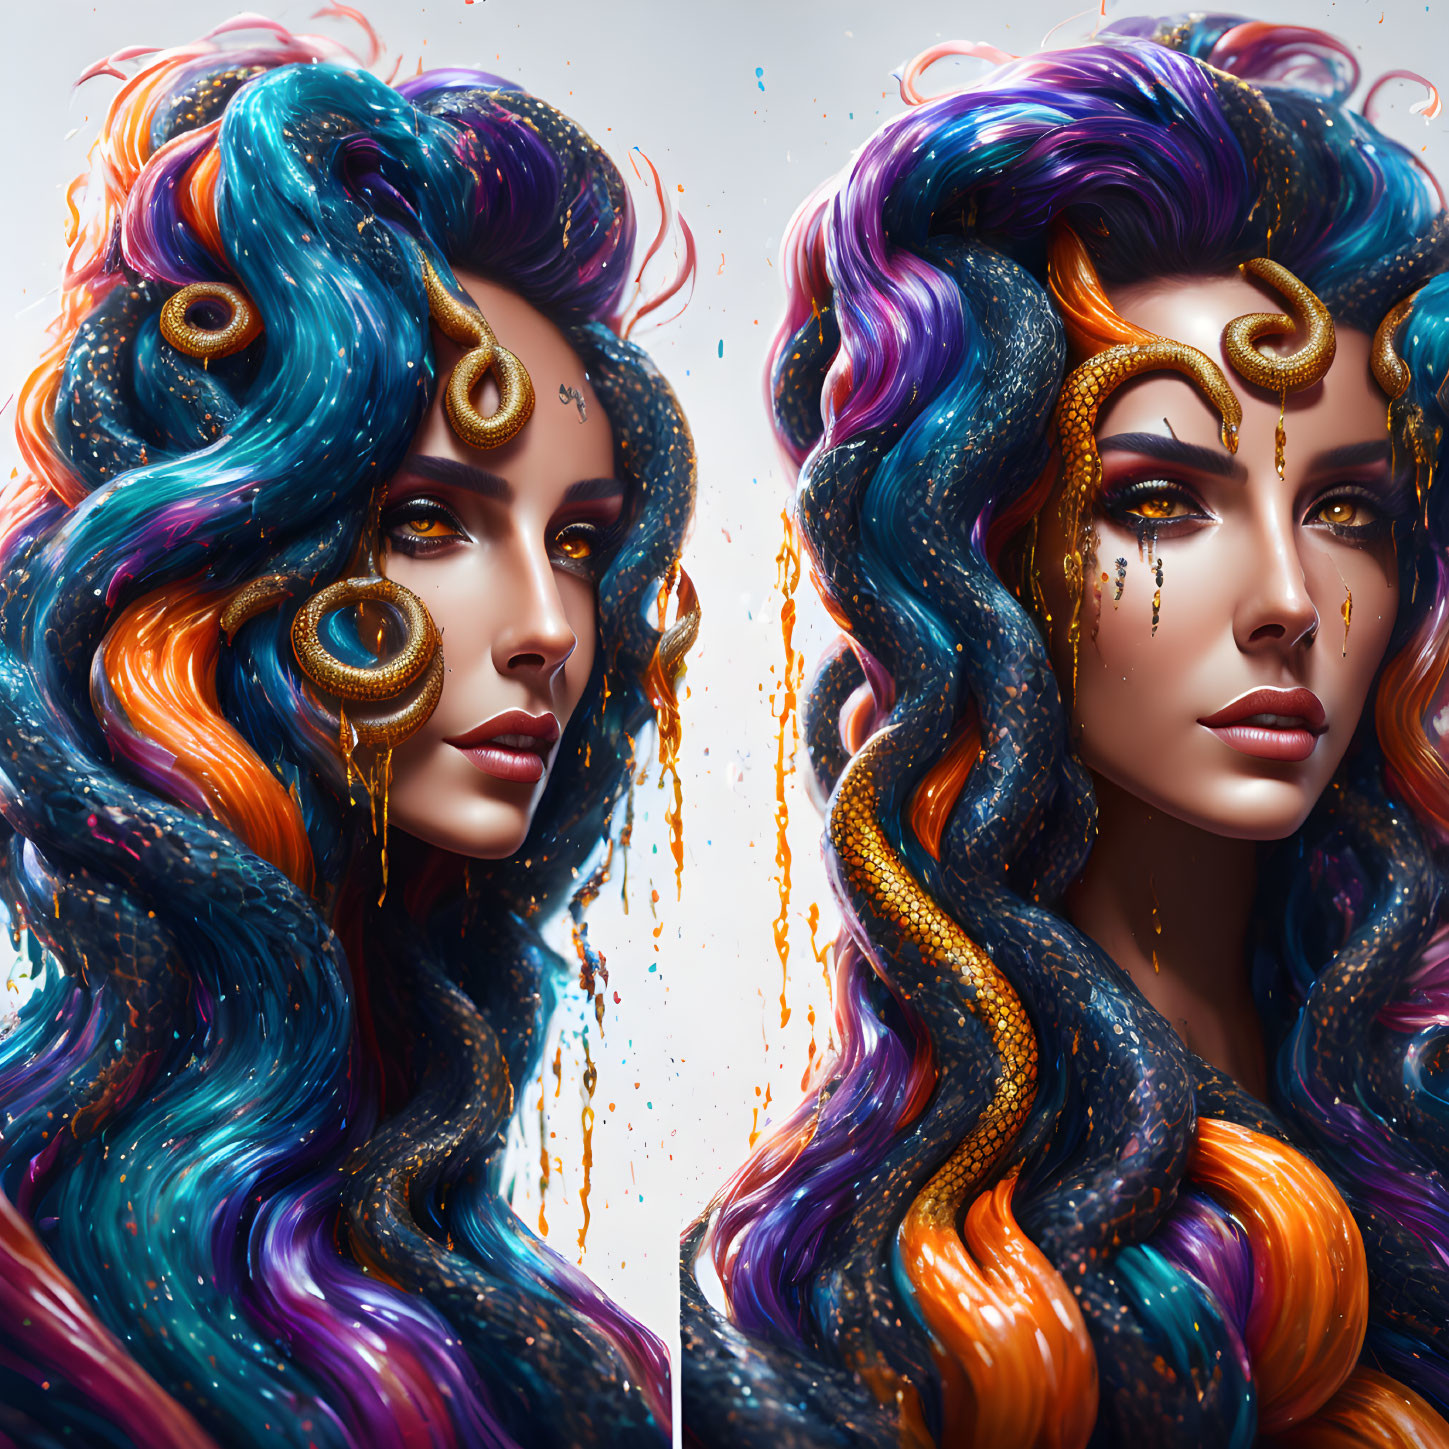 Stylized digital portraits of a woman with galaxy hair and golden snake.